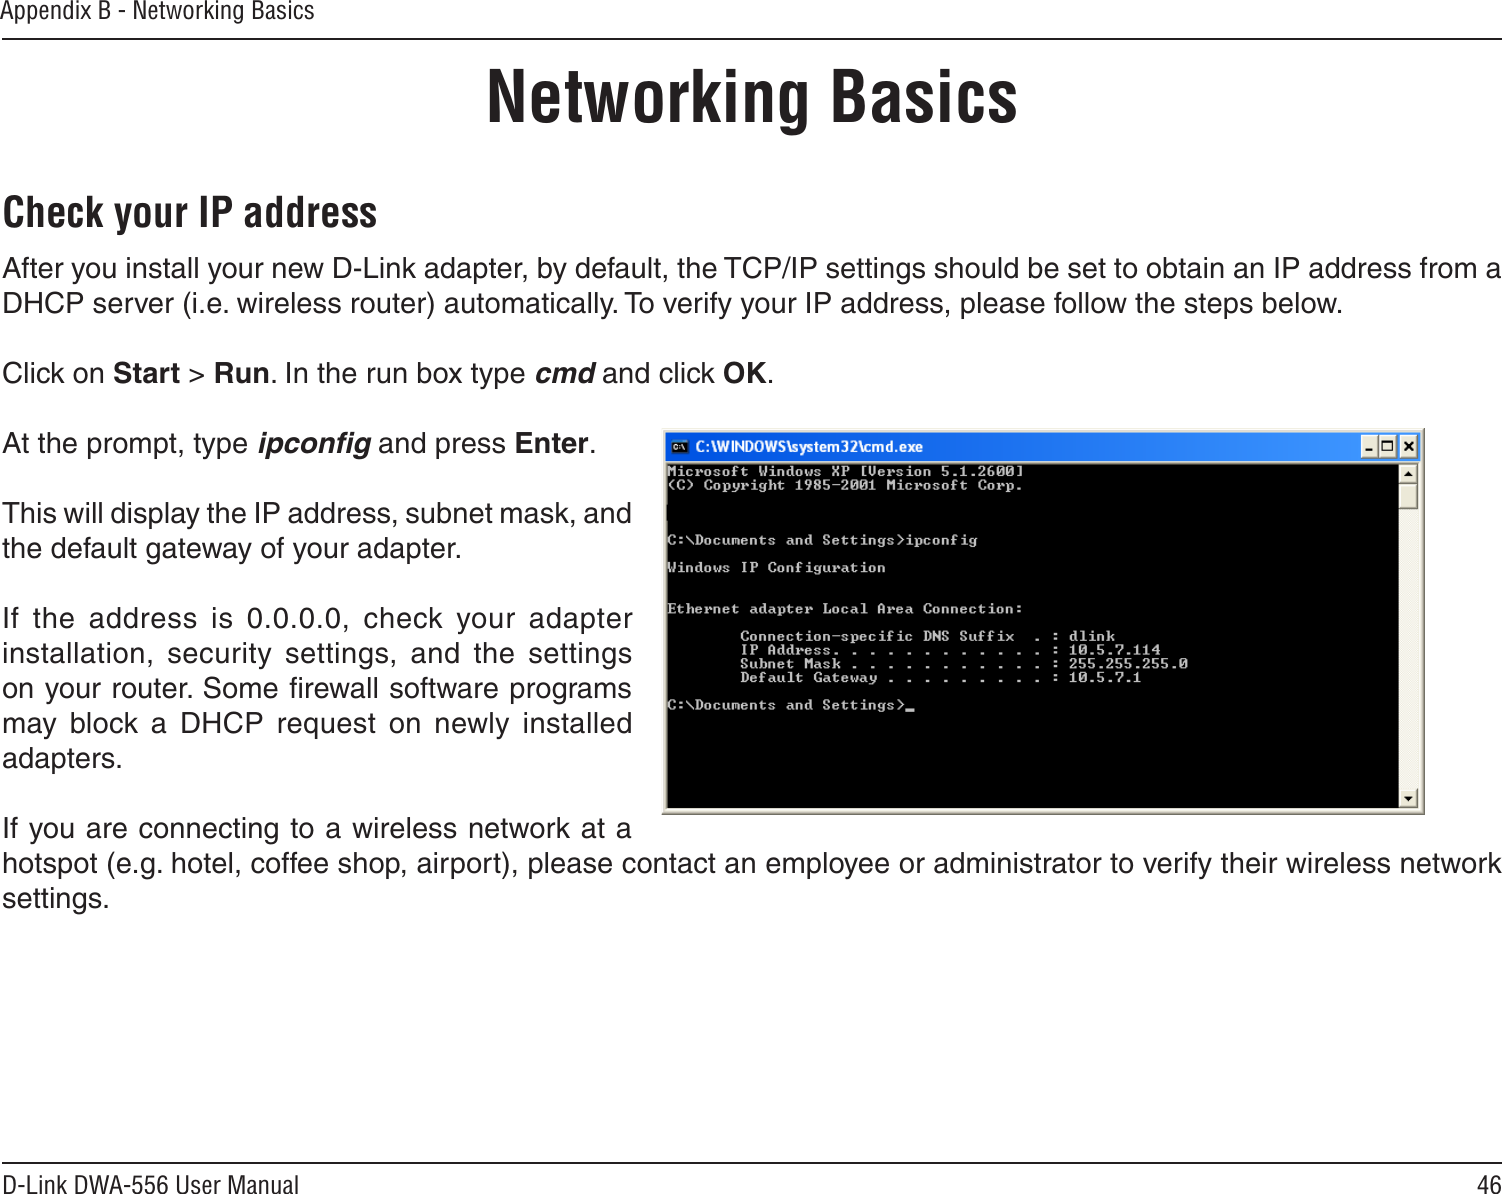 46D-Link DWA-556 User ManualAppendix B - Networking BasicsNetworking BasicsCheck your IP addressAfter you install your new D-Link adapter, by default, the TCP/IP settings should be set to obtain an IP address from a DHCP server (i.e. wireless router) automatically. To verify your IP address, please follow the steps below.Click on Start &gt; Run. In the run box type cmd and click OK.At the prompt, type ipconﬁg and press Enter.This will display the IP address, subnet mask, and the default gateway of your adapter.If  the  address  is  0.0.0.0,  check  your  adapter installation,  security  settings,  and  the  settings on your router. Some ﬁrewall software programs may  block  a  DHCP  request  on  newly  installed adapters. If you are connecting to a wireless network at a hotspot (e.g. hotel, coffee shop, airport), please contact an employee or administrator to verify their wireless network settings.